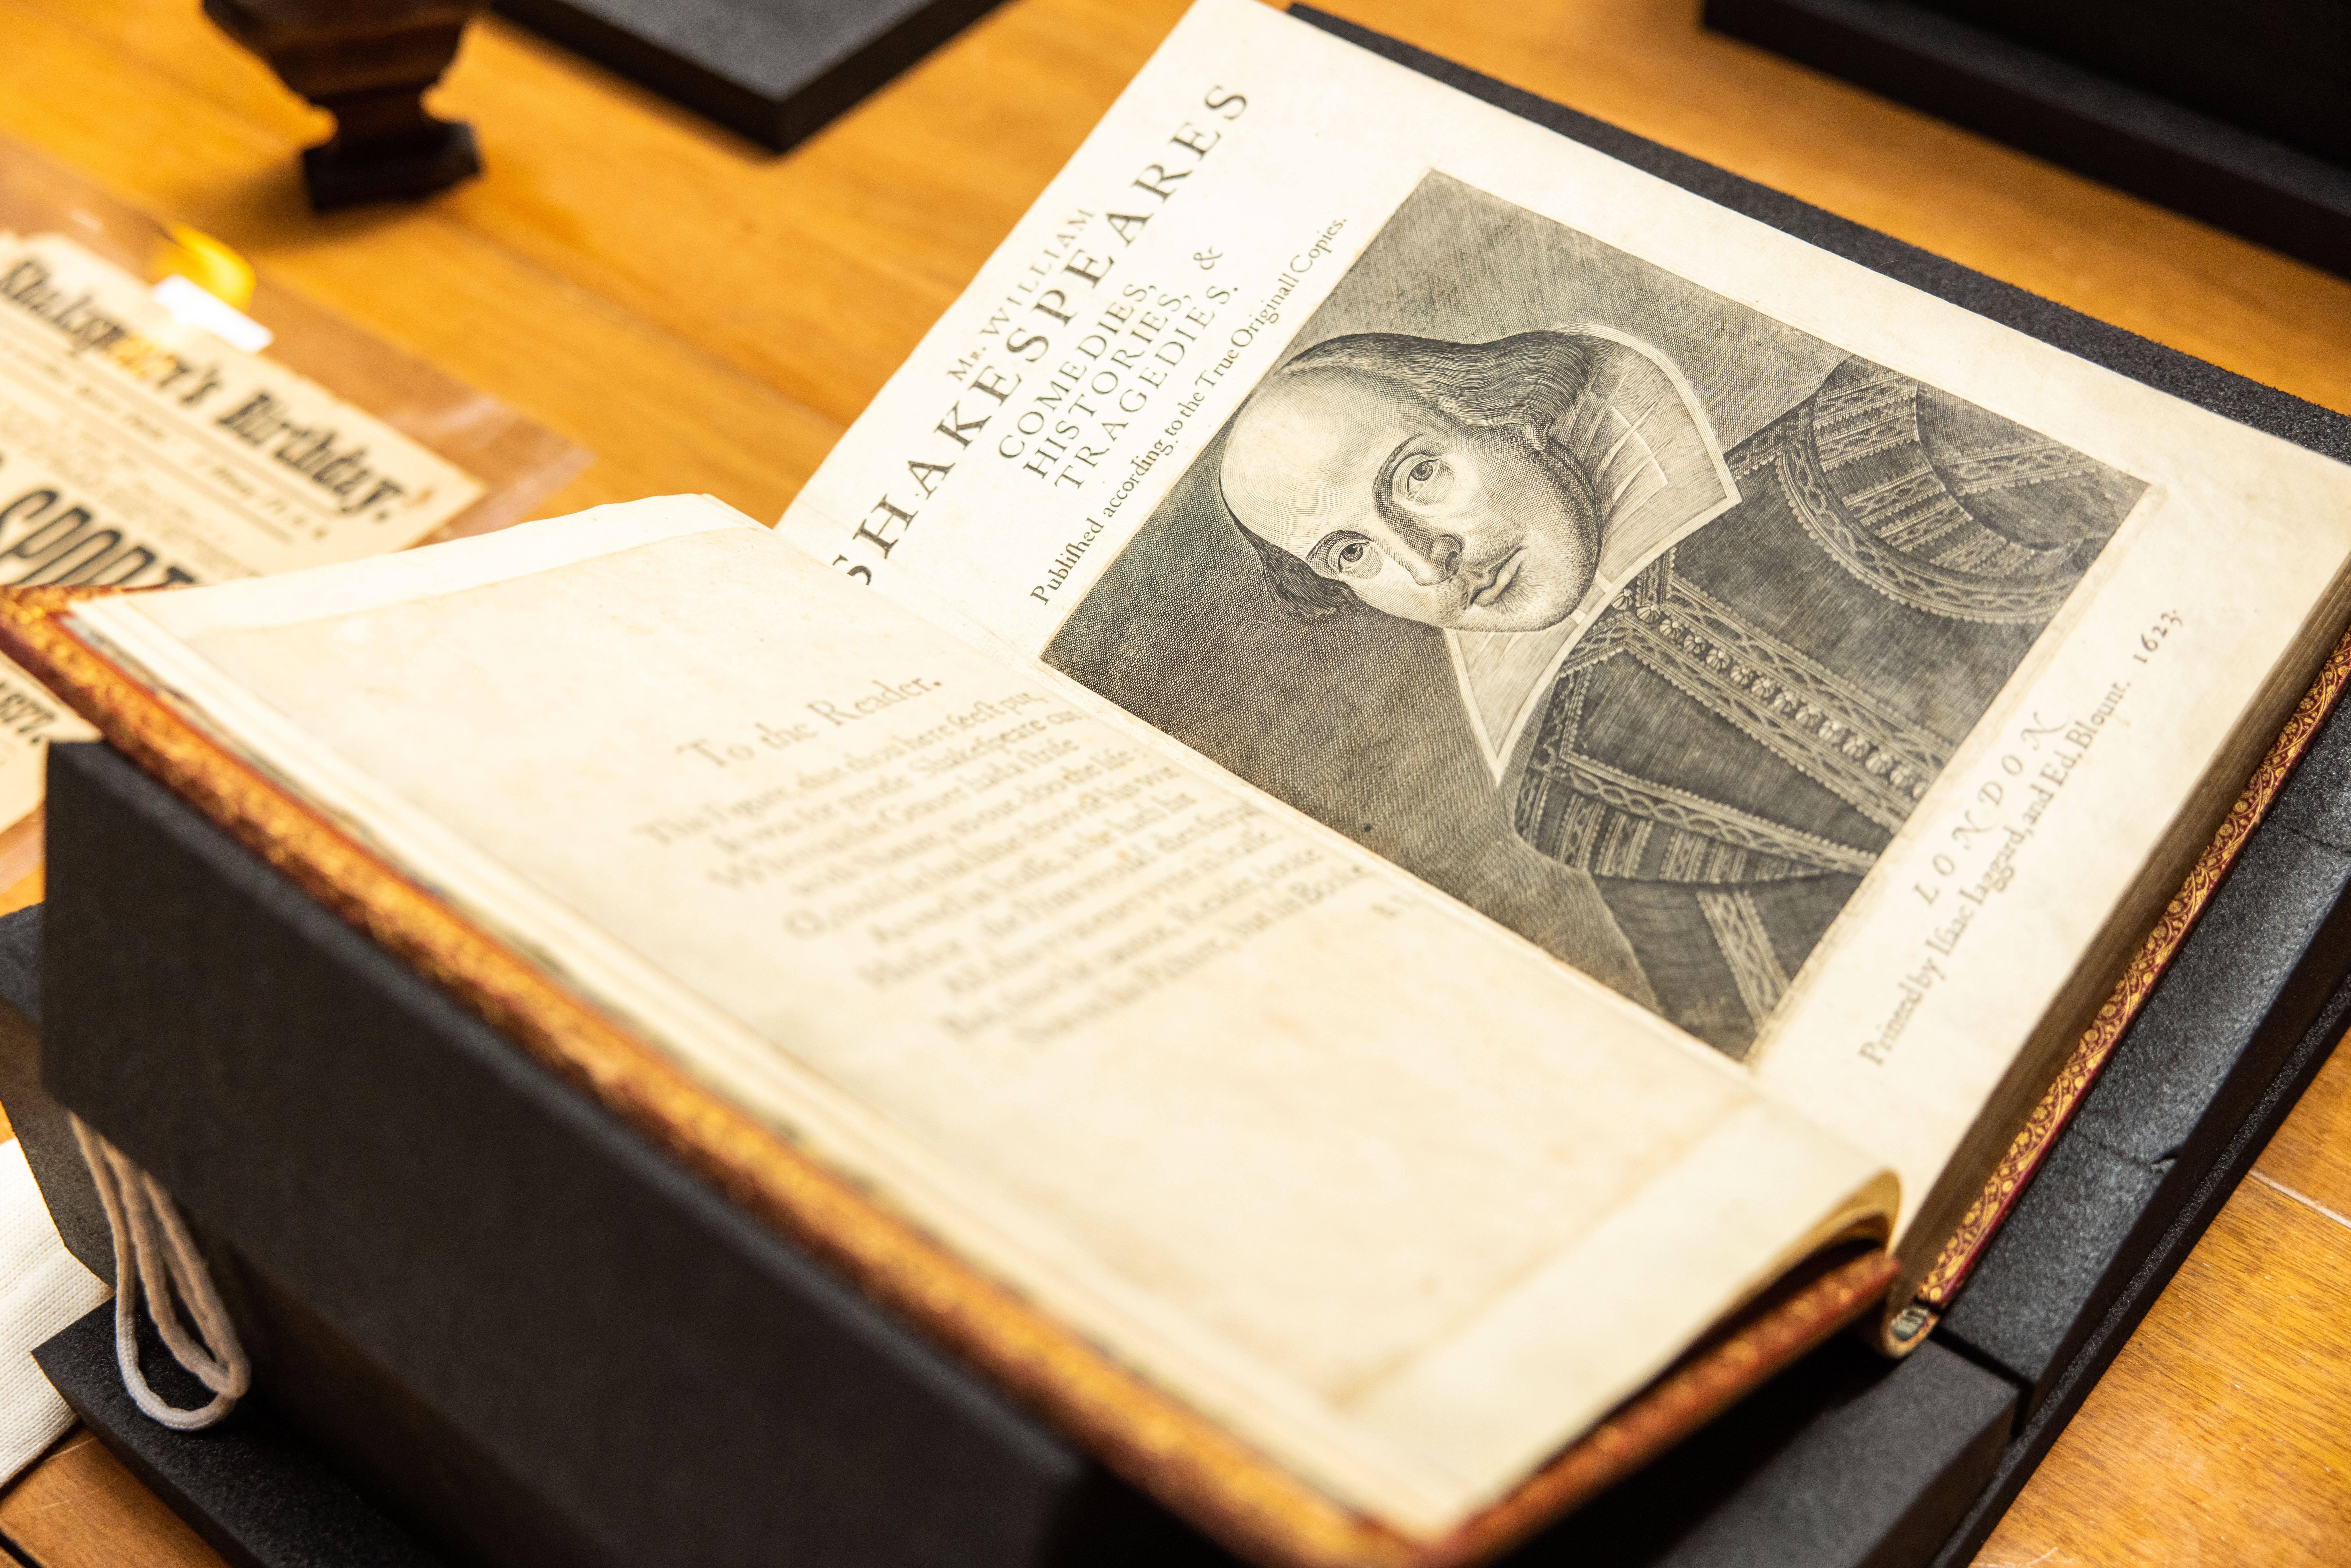 A Shakespeare First Folio dated 1623 open to the title page